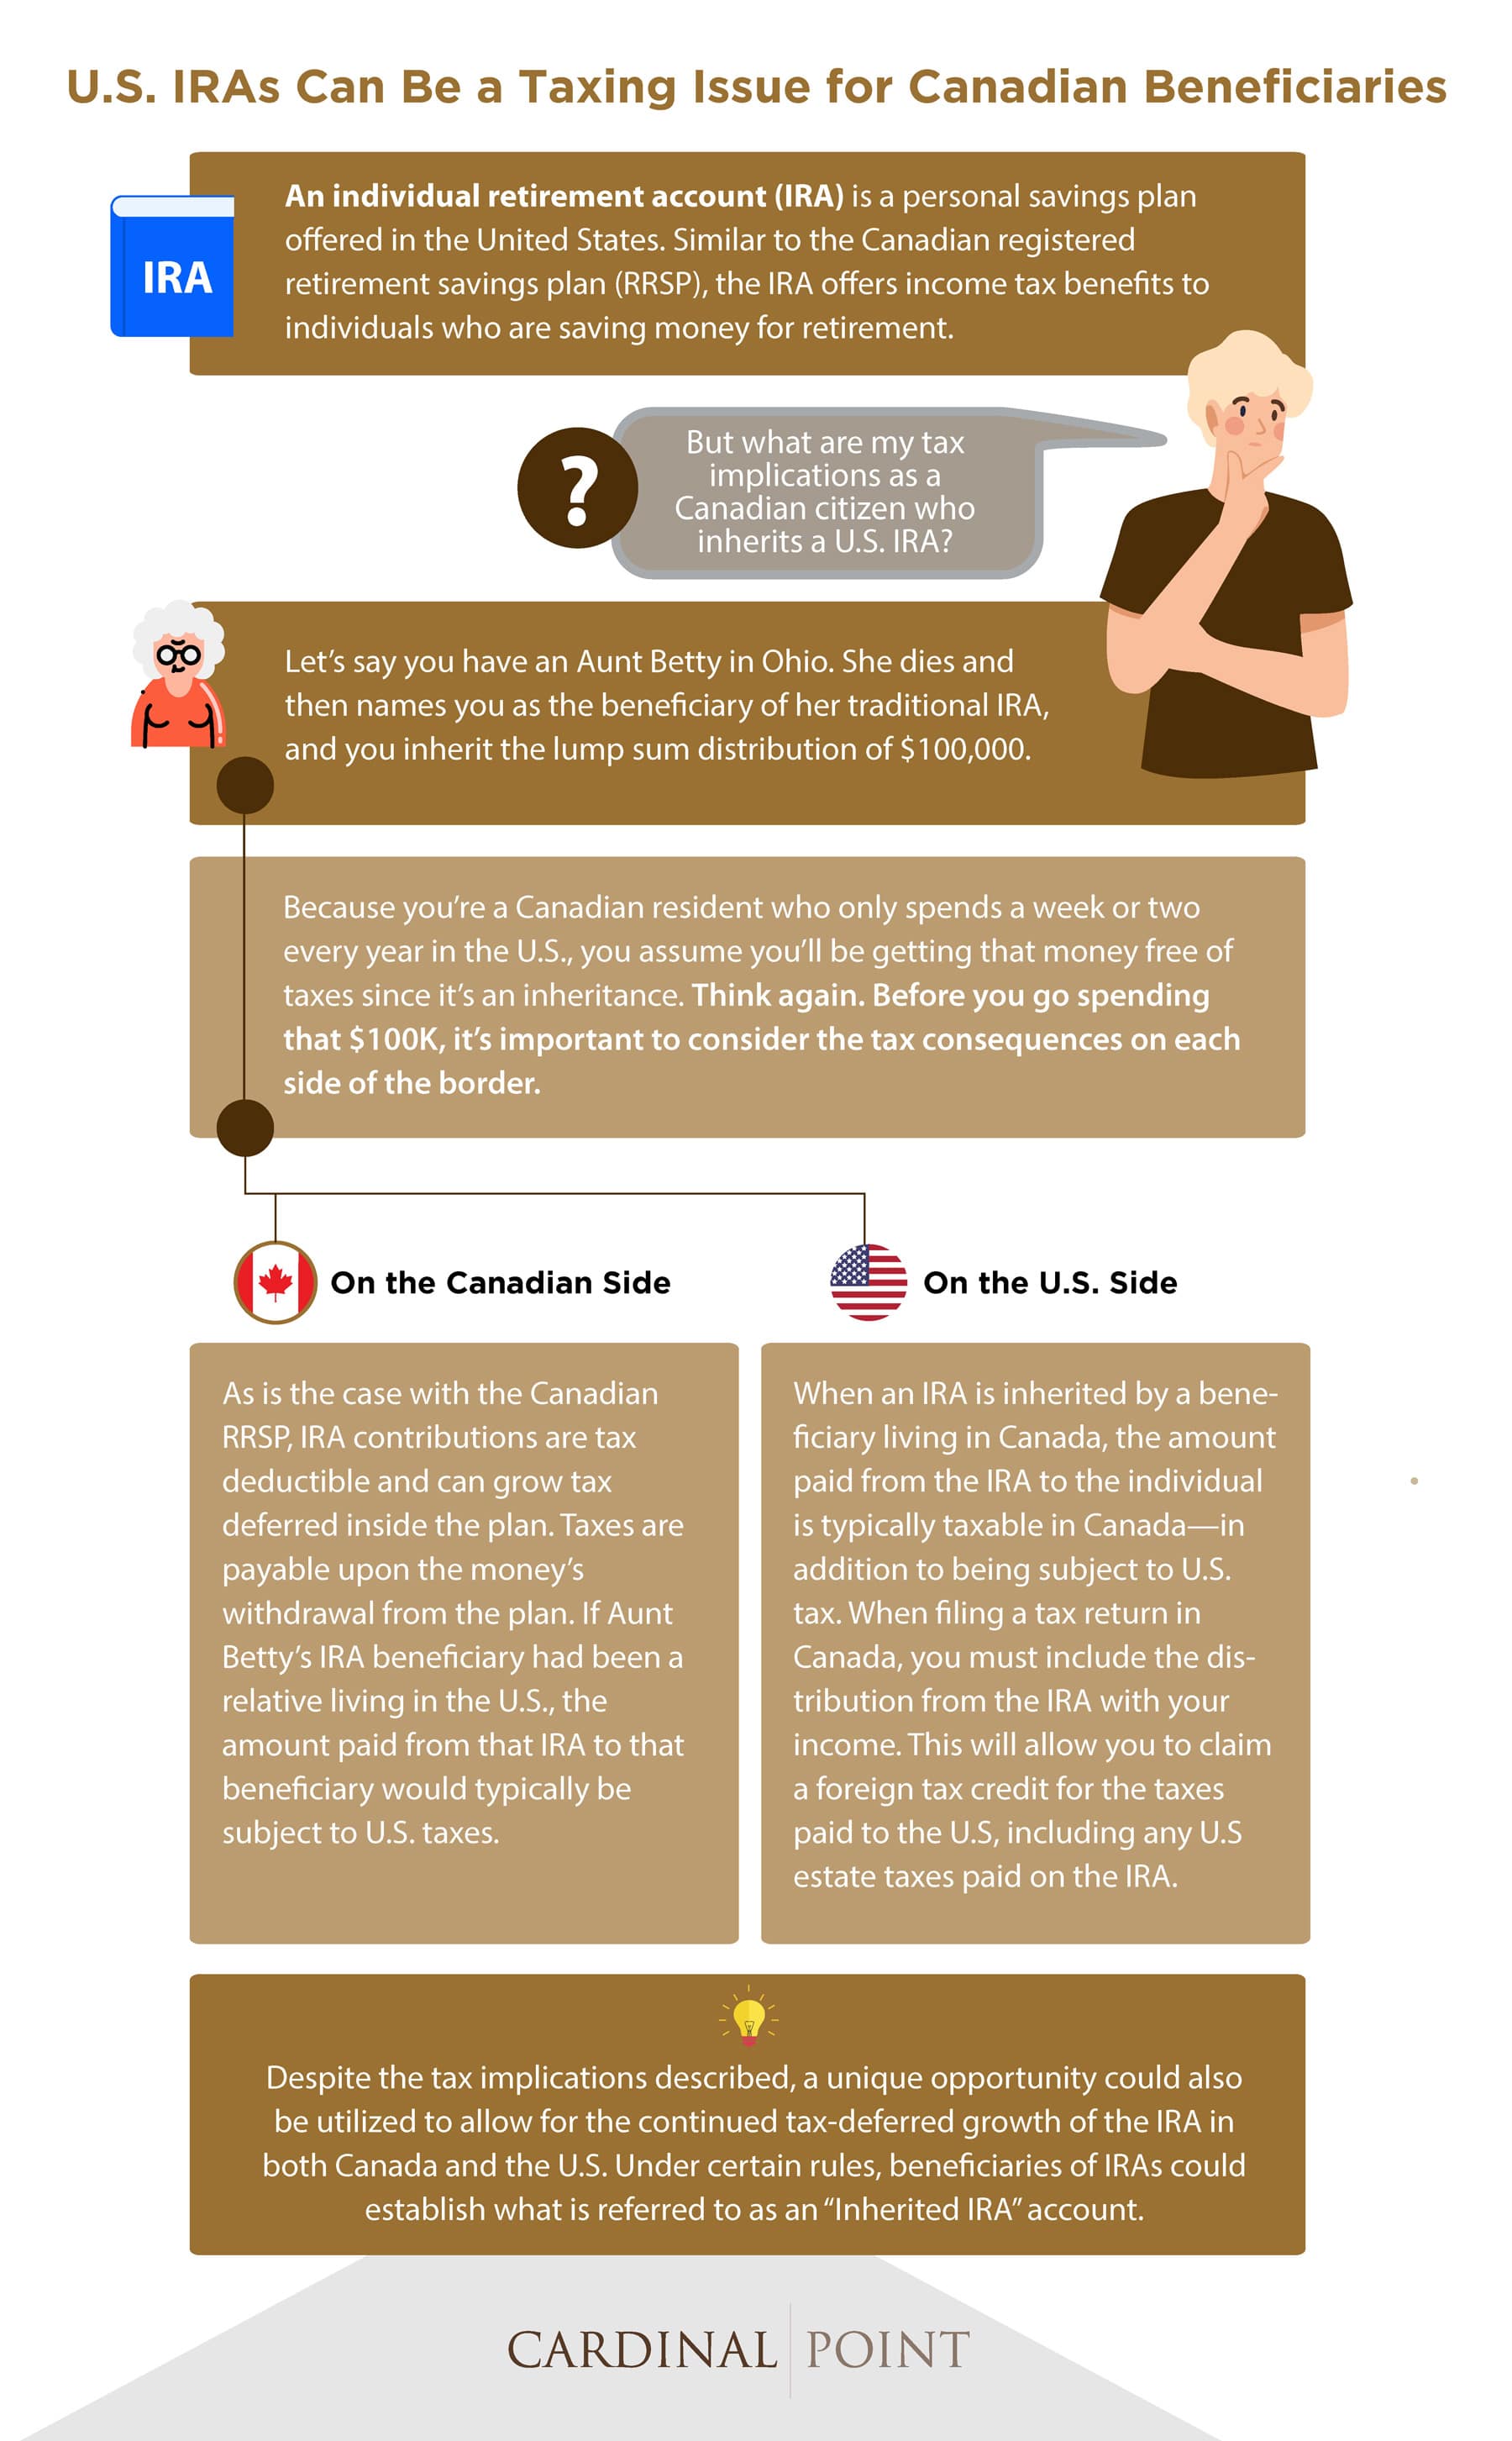 U.S. IRAs Can Be a Taxing Issue for Canadian Beneficiaries Infographic